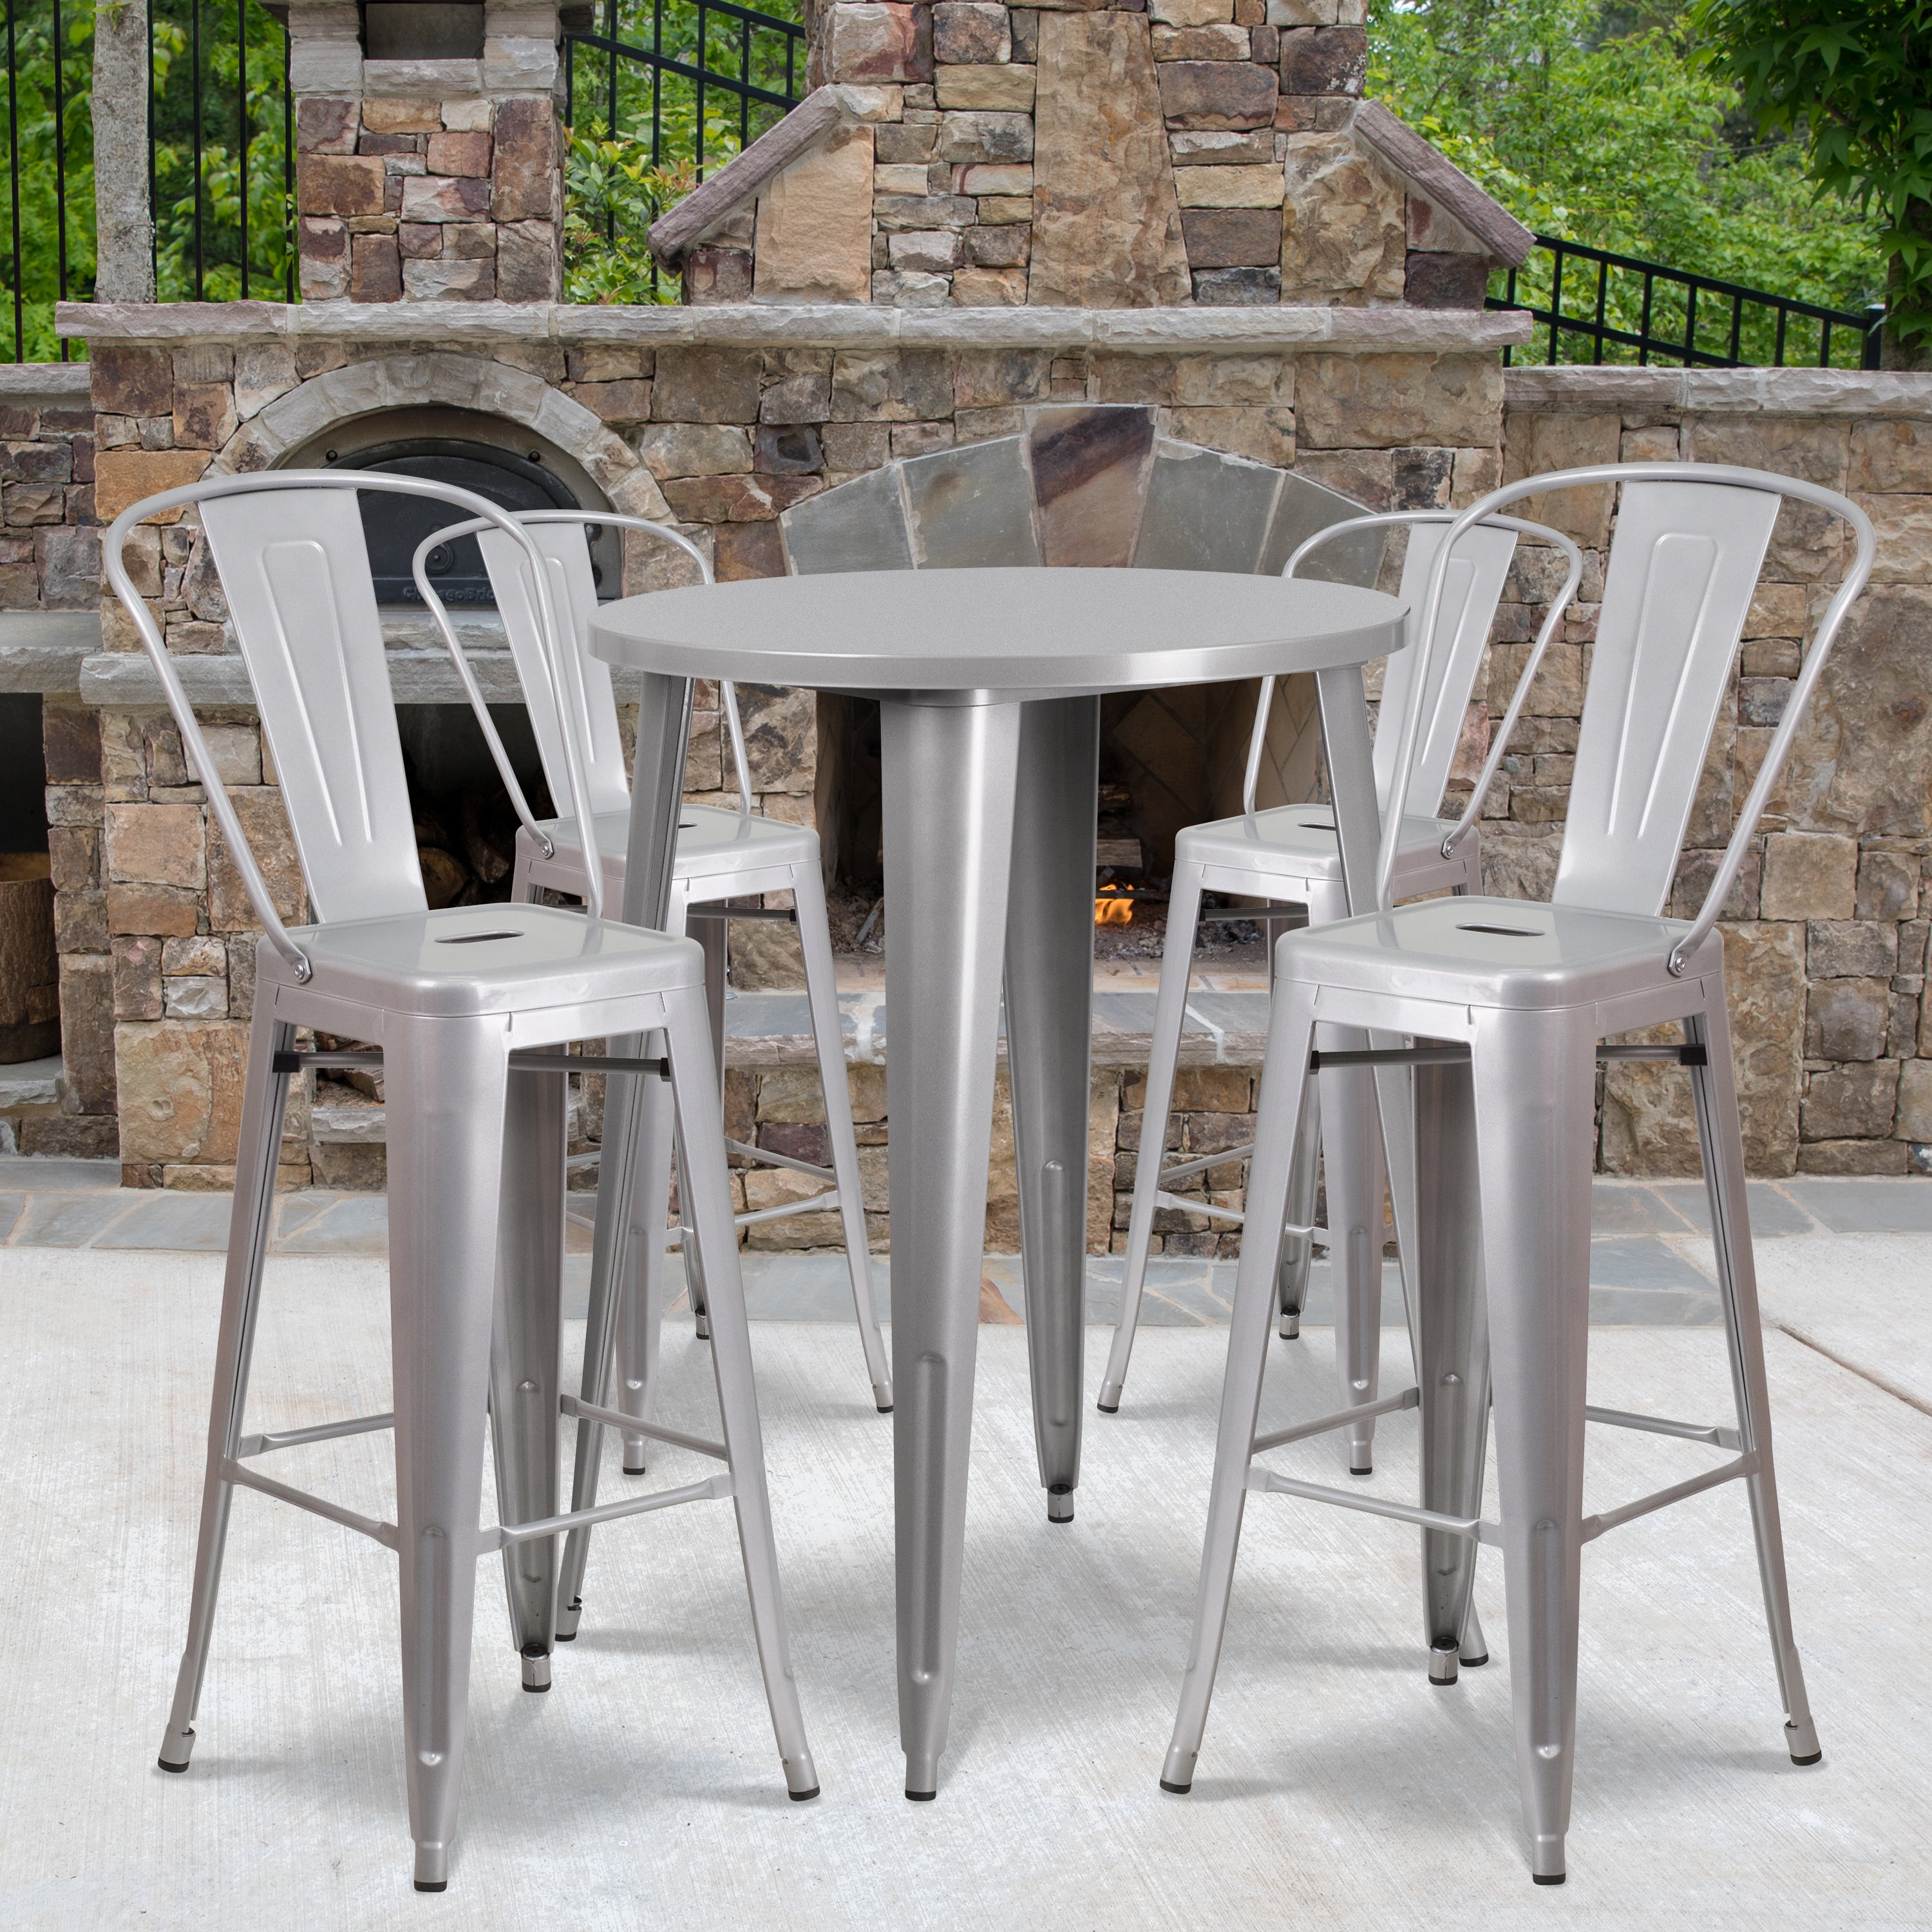 Flash Furniture Commercial Grade 30, Outdoor Pub Table Set For 4